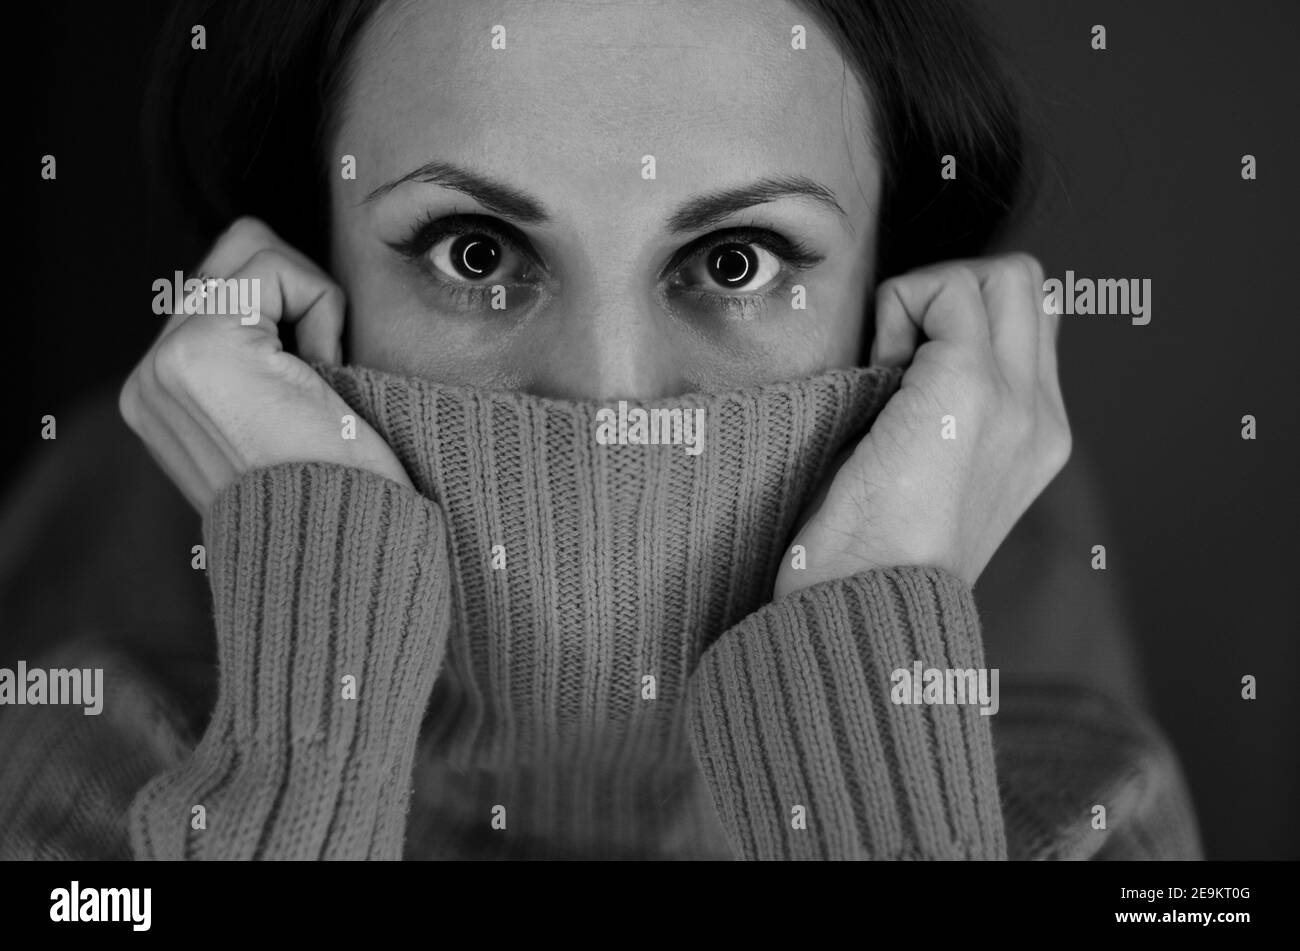 Black and white portrait of a scared woman Stock Photo